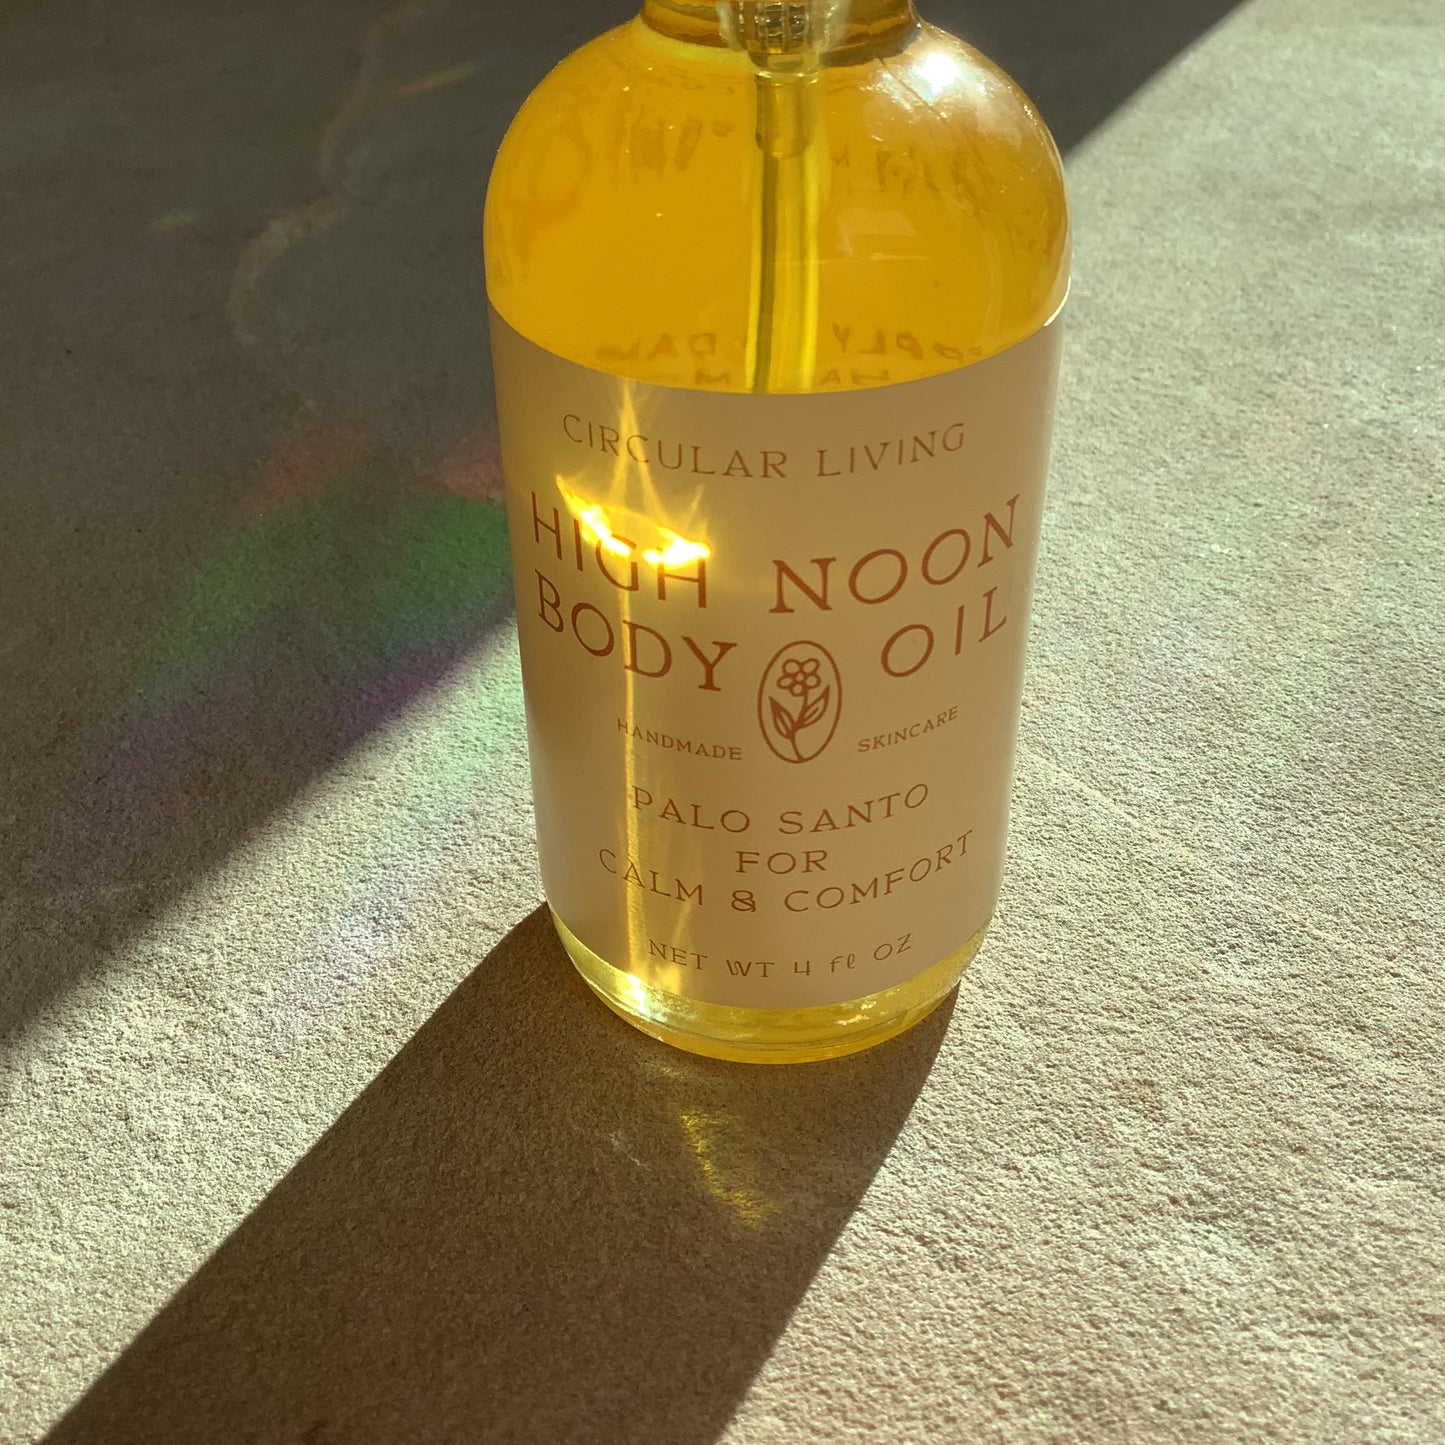 High Noon Body Oil